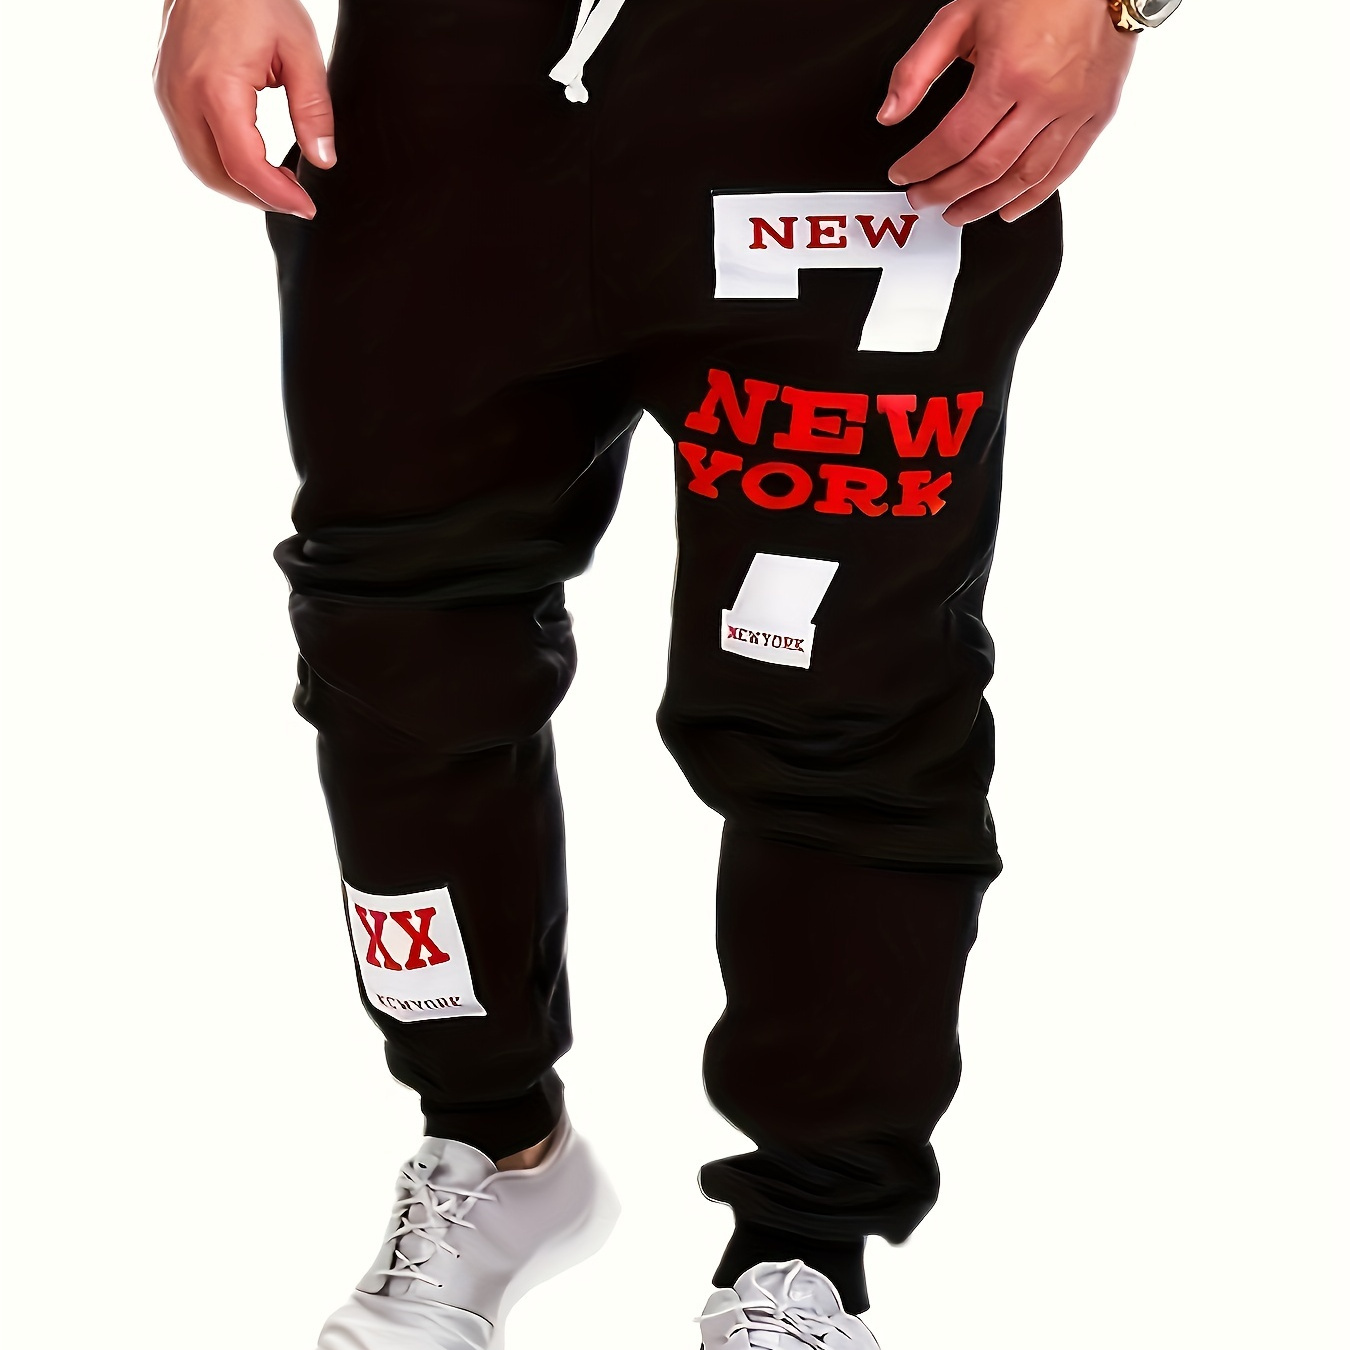 

new York" & Number 7 Print Joggers, Men's Casual Stretch Waist Drawstring Sweatpants For All Seasons